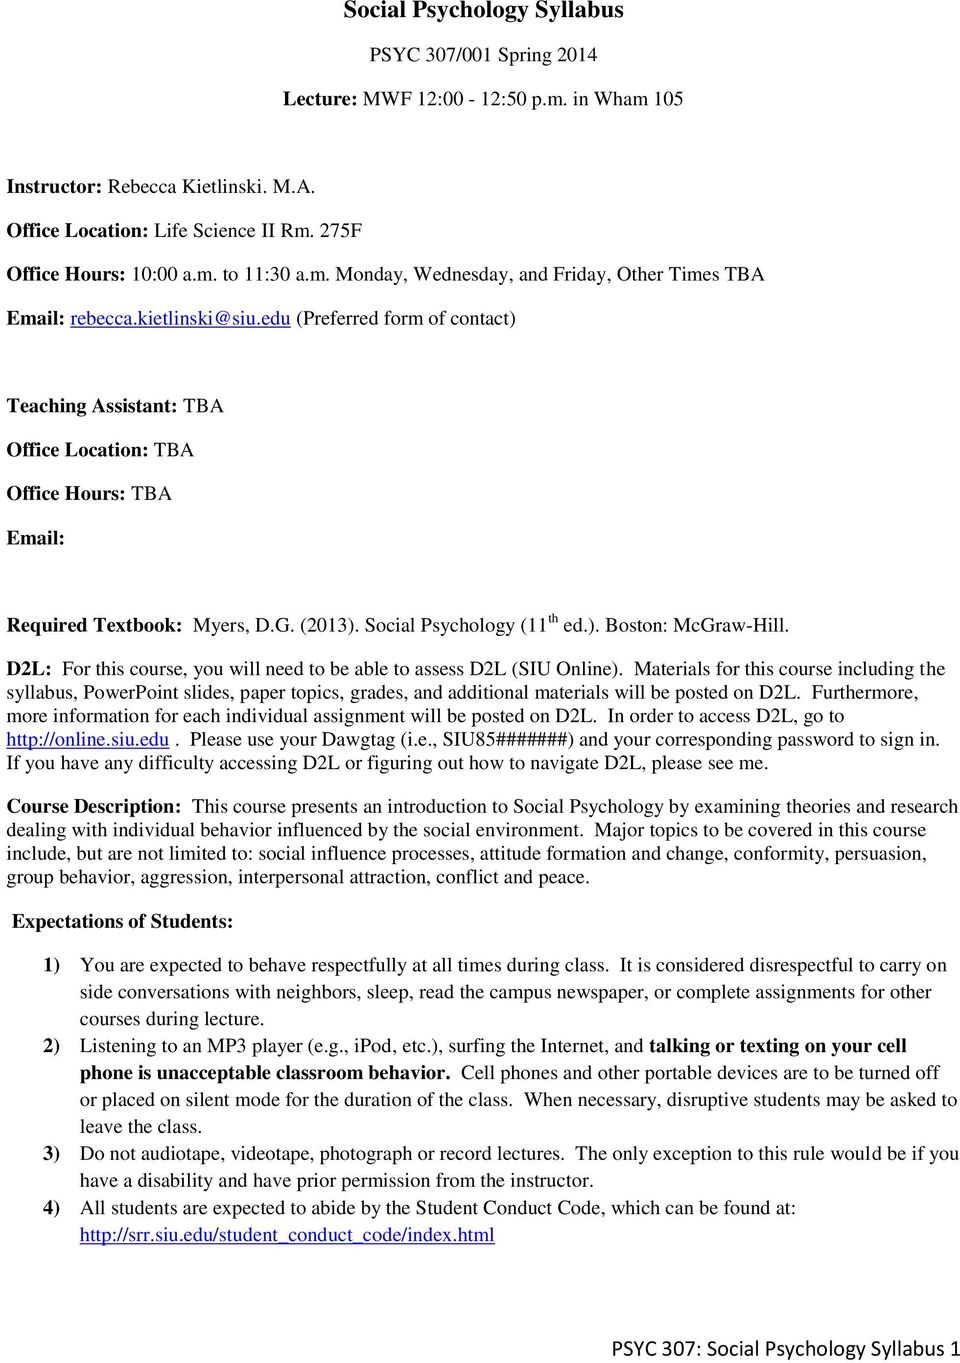 edu (Preferred form of contact) Teaching Assistant: TBA Office Location: TBA Office Hours: TBA Email: Required Textbook: Myers, D.G. (2013). Social Psychology (11 th ed.). Boston: McGraw-Hill.